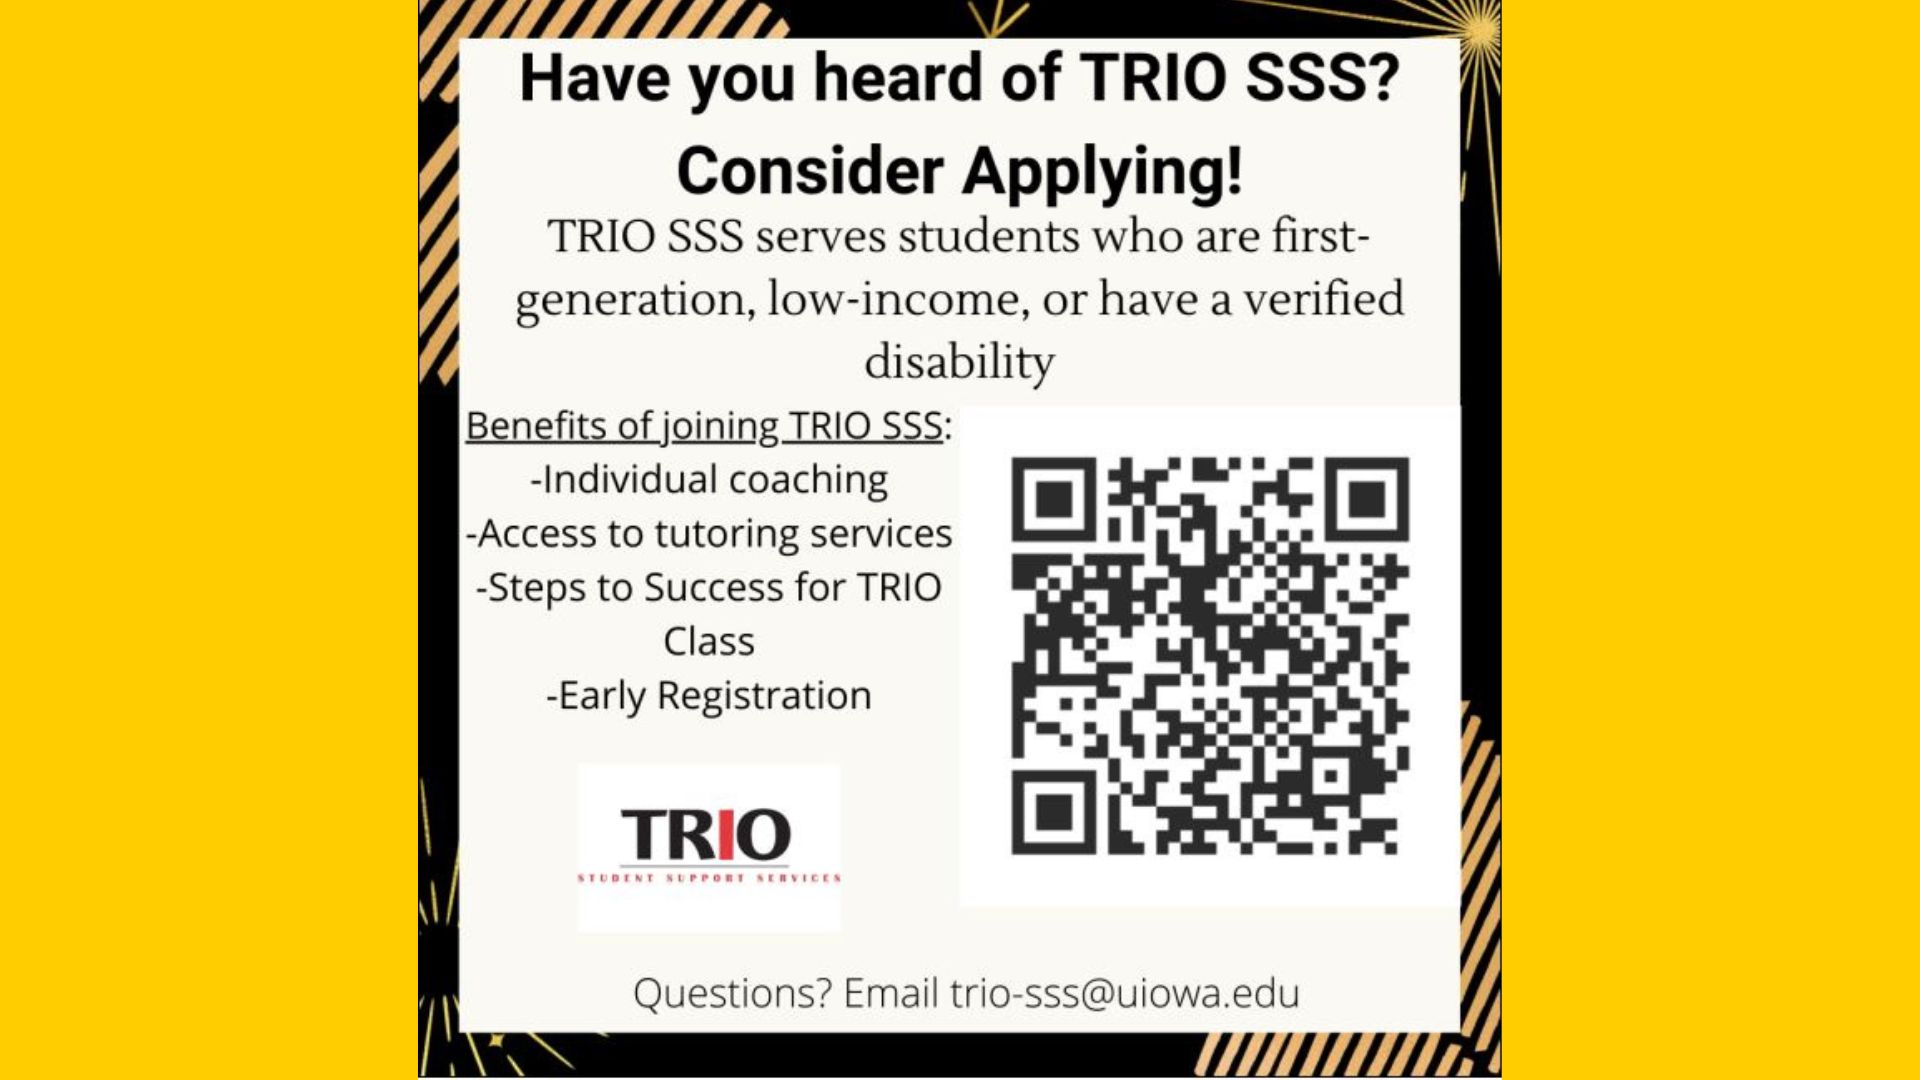 Apply to Trio SSS